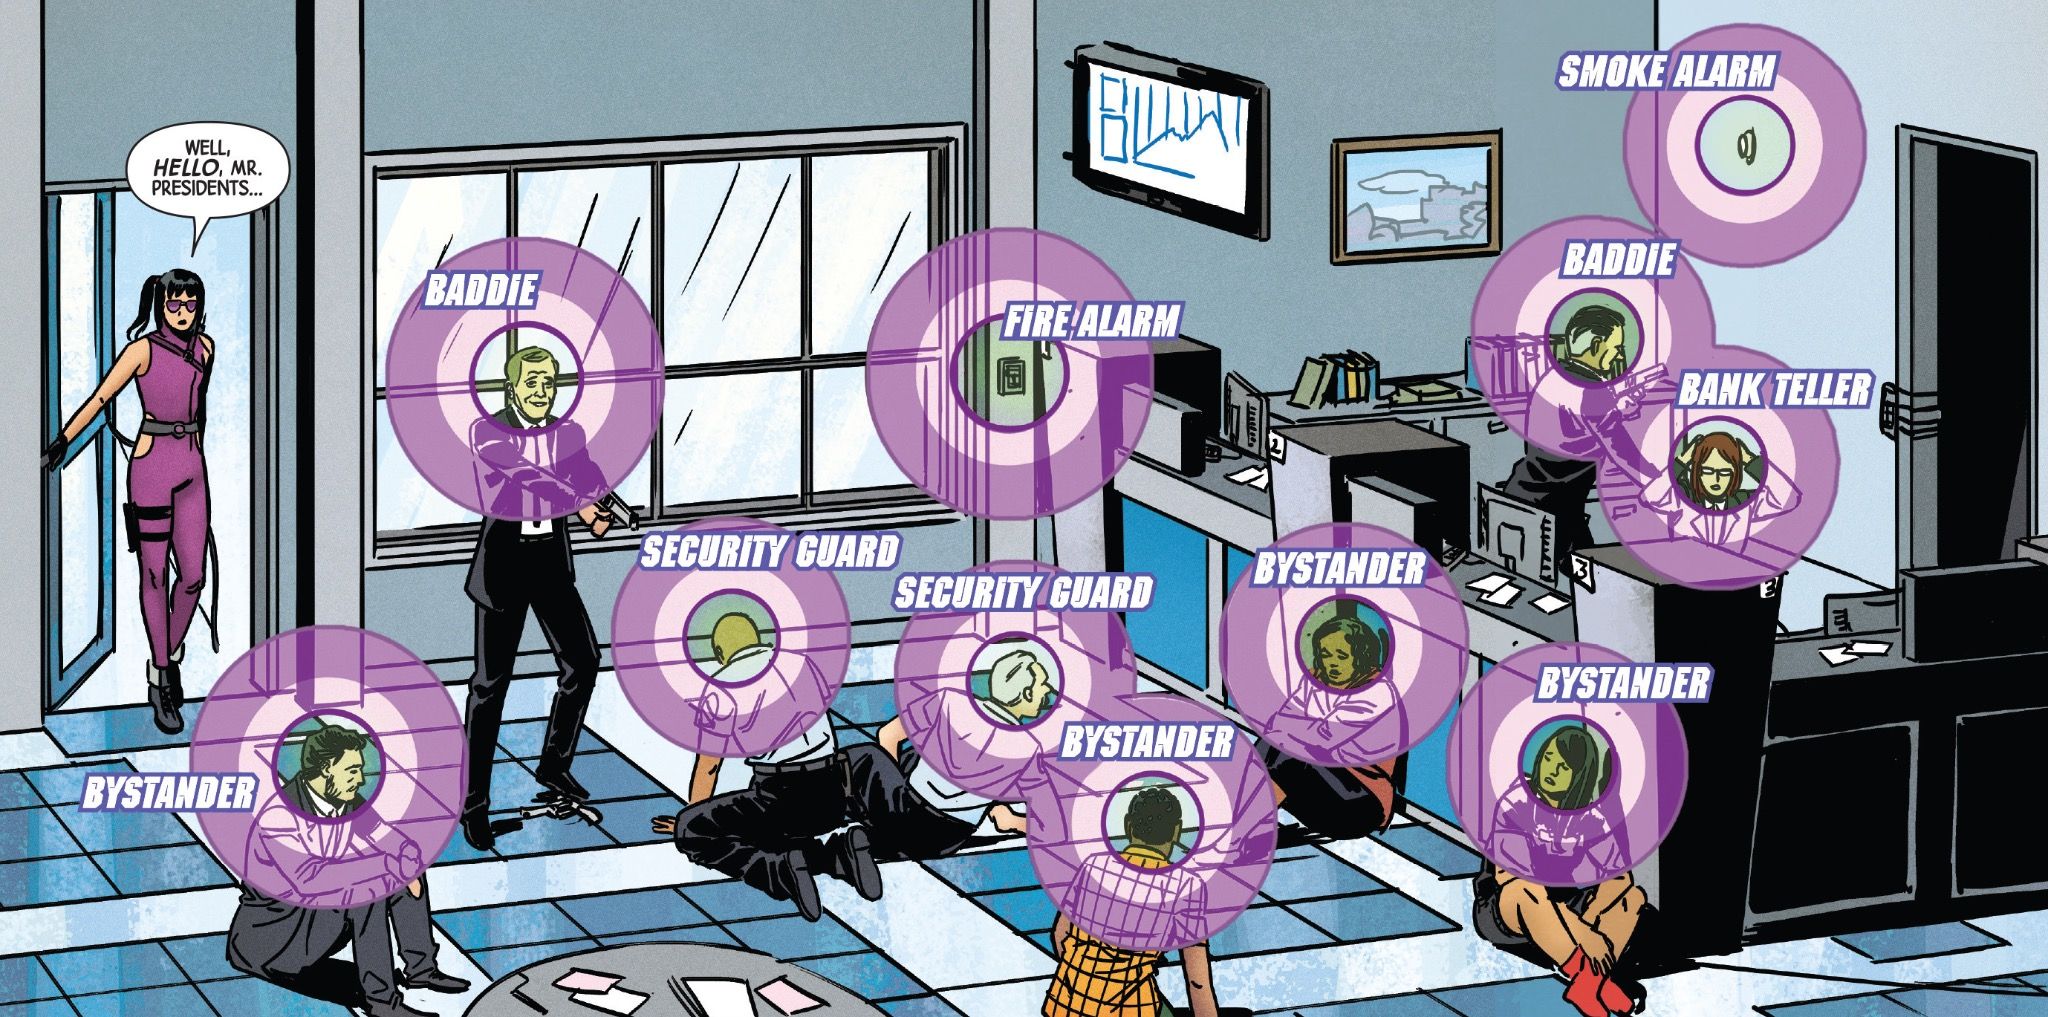 Kate Bishop scopes out the scene at at bank robbery. Robbers are wearing president masks.